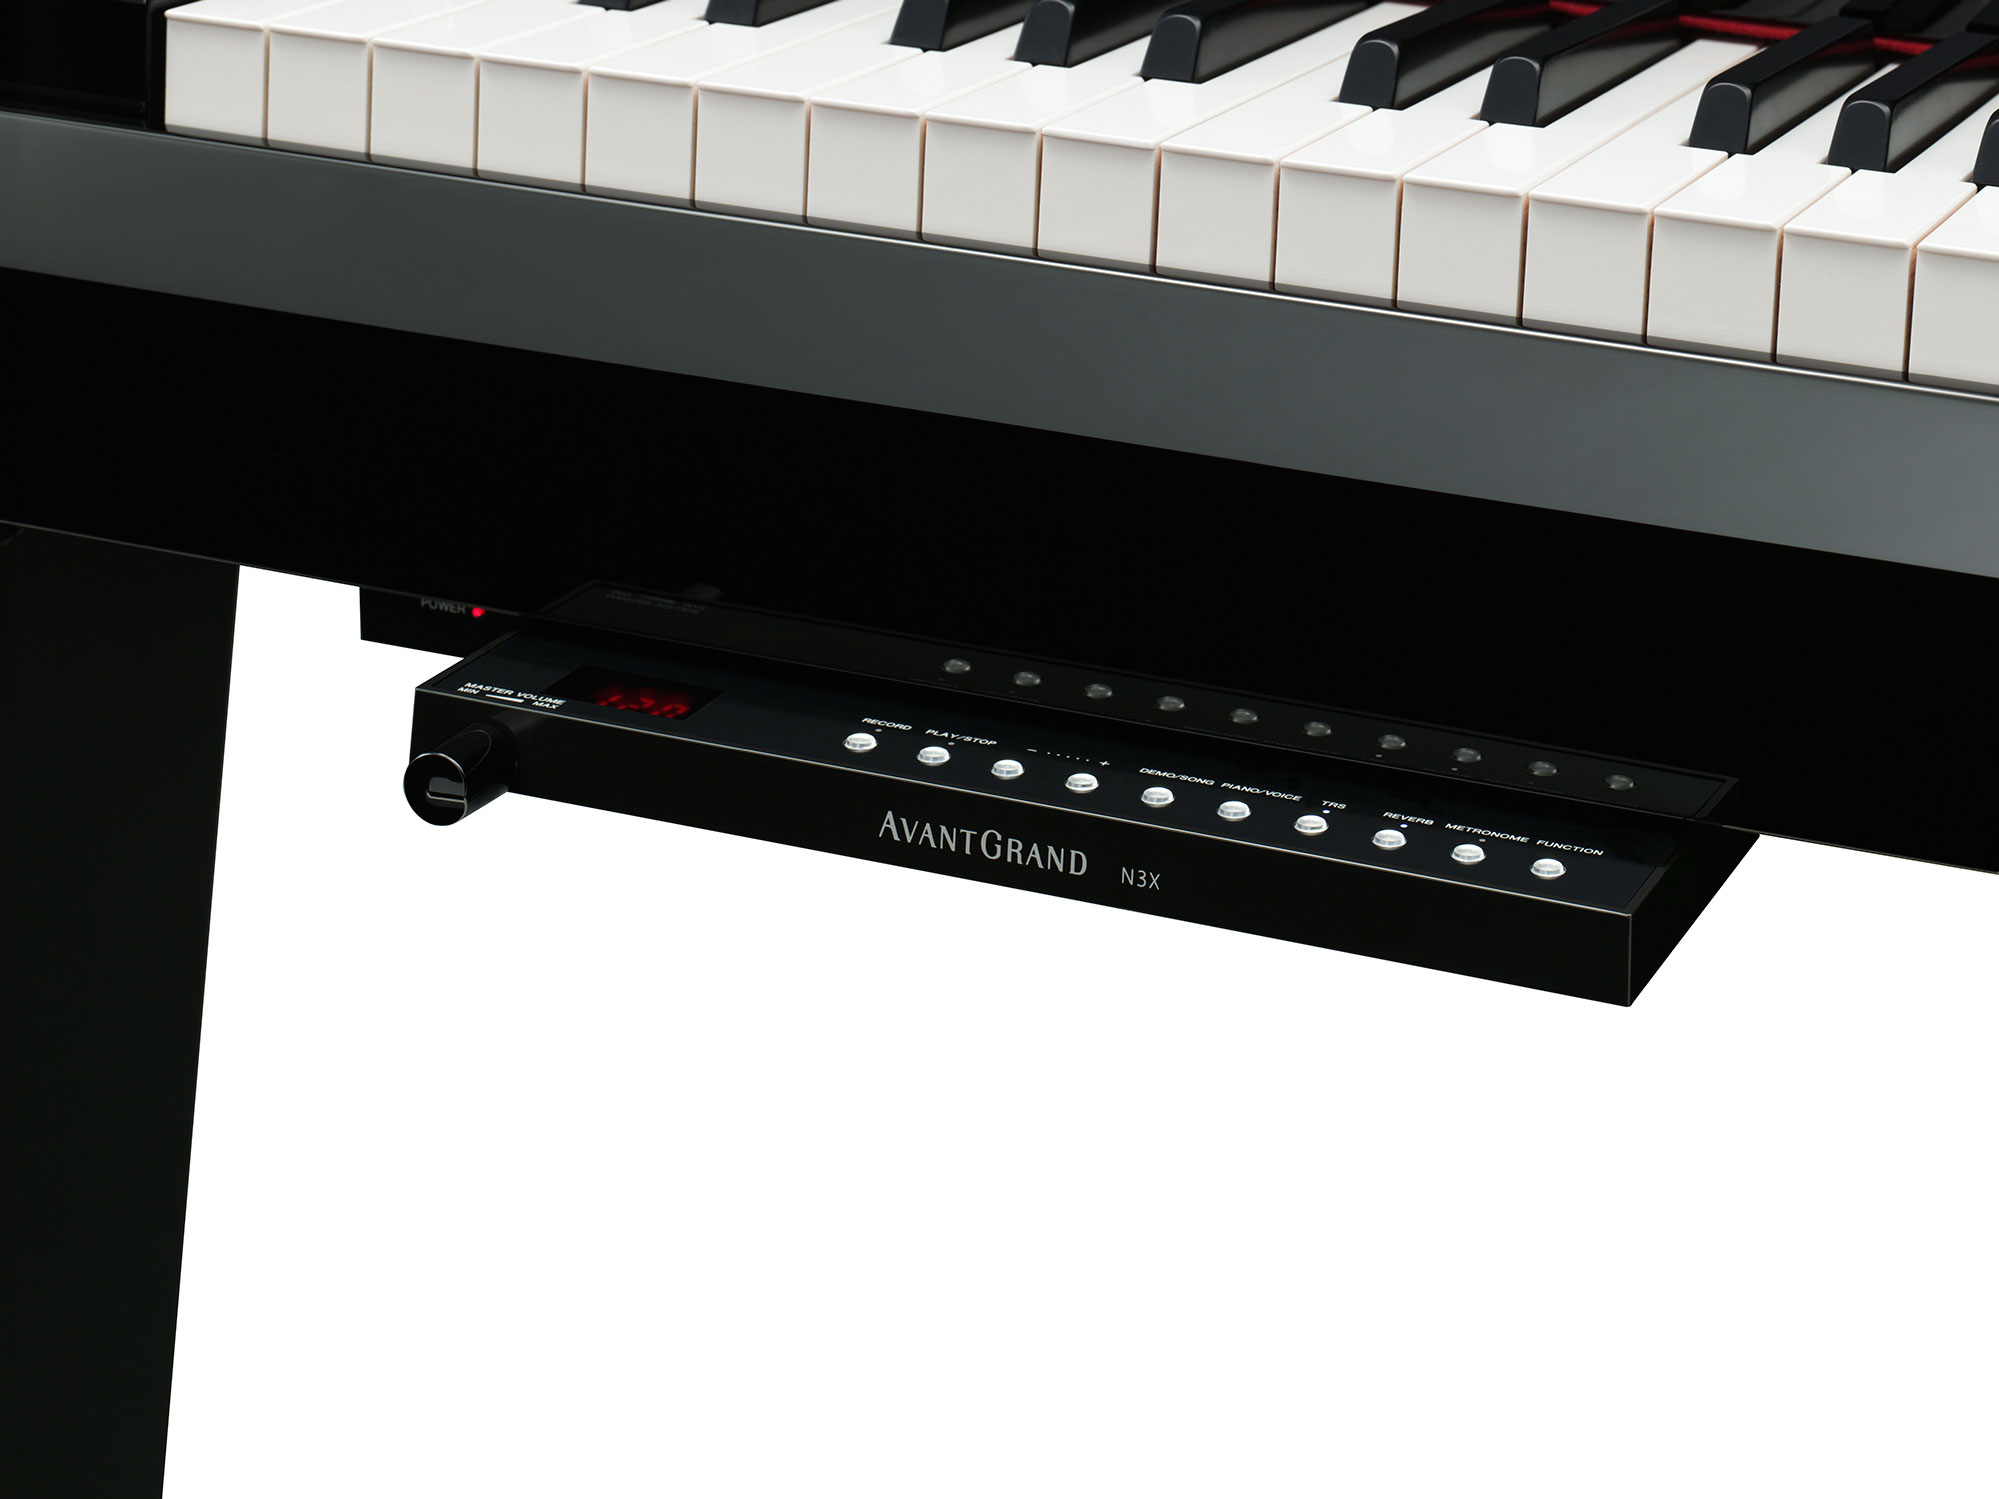 Yamaha N3x - LaquÉ Noir - Digital piano with stand - Variation 8